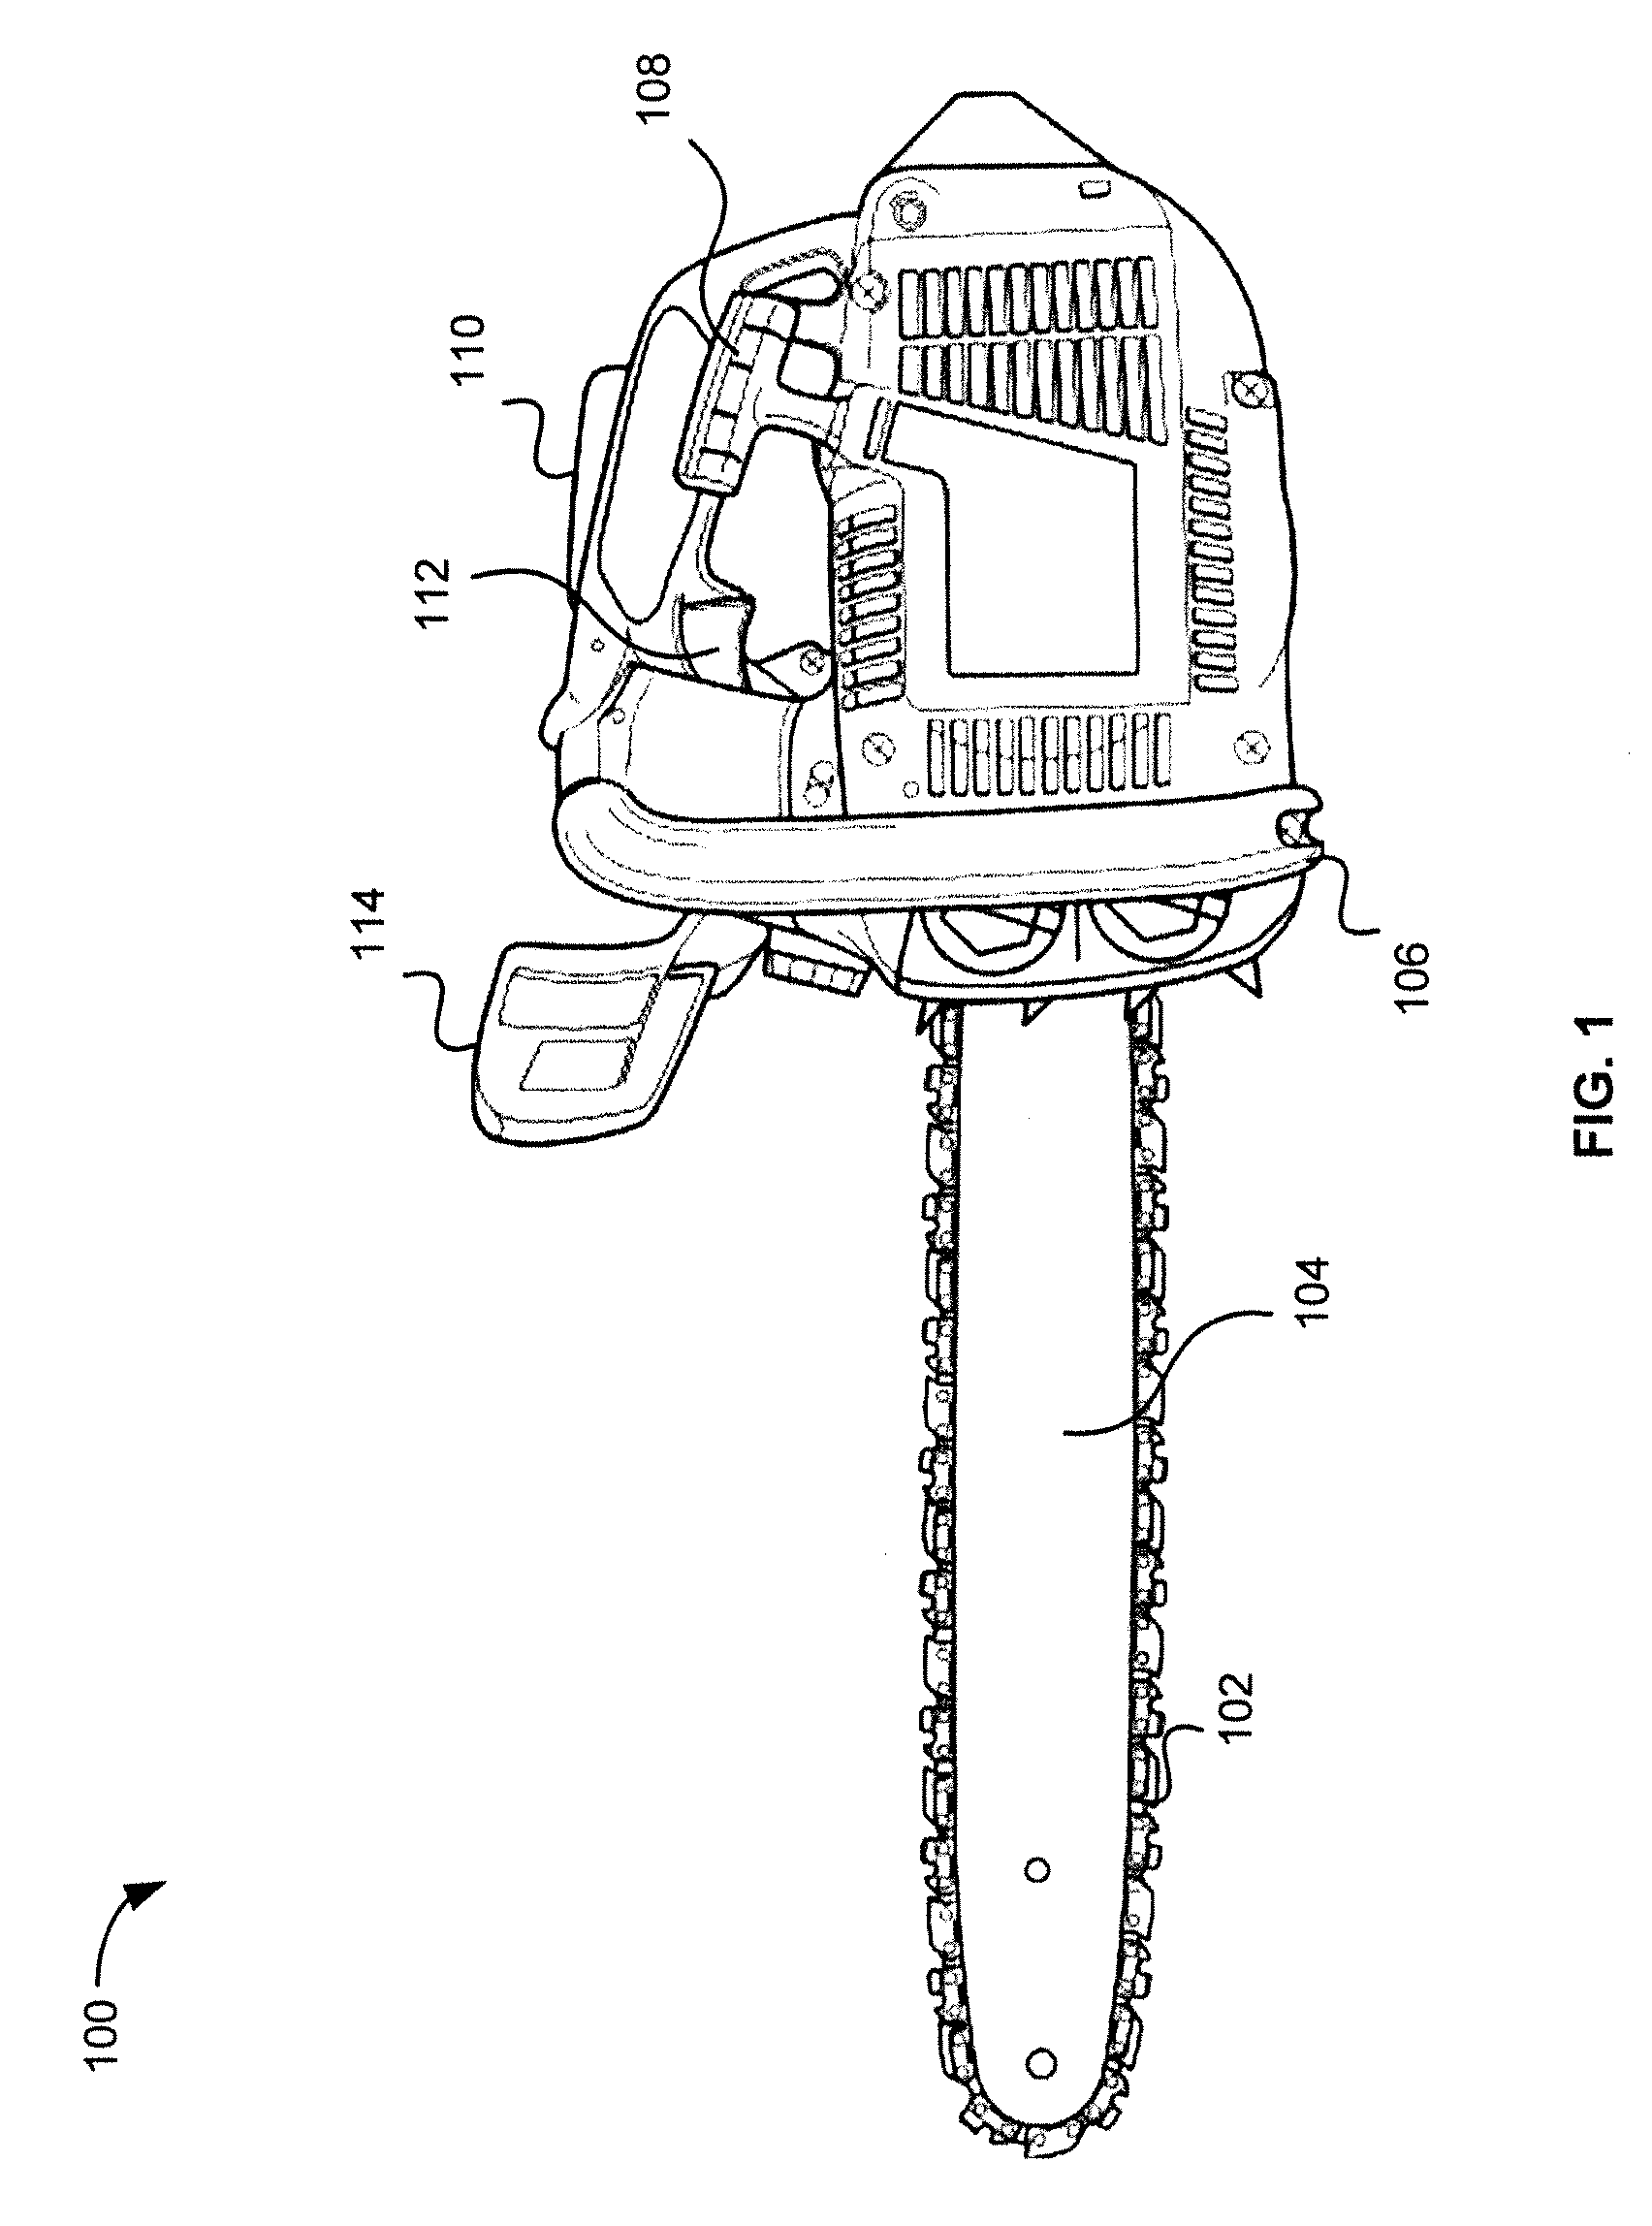 Systems and Methods for a Chainsaw Safety Device